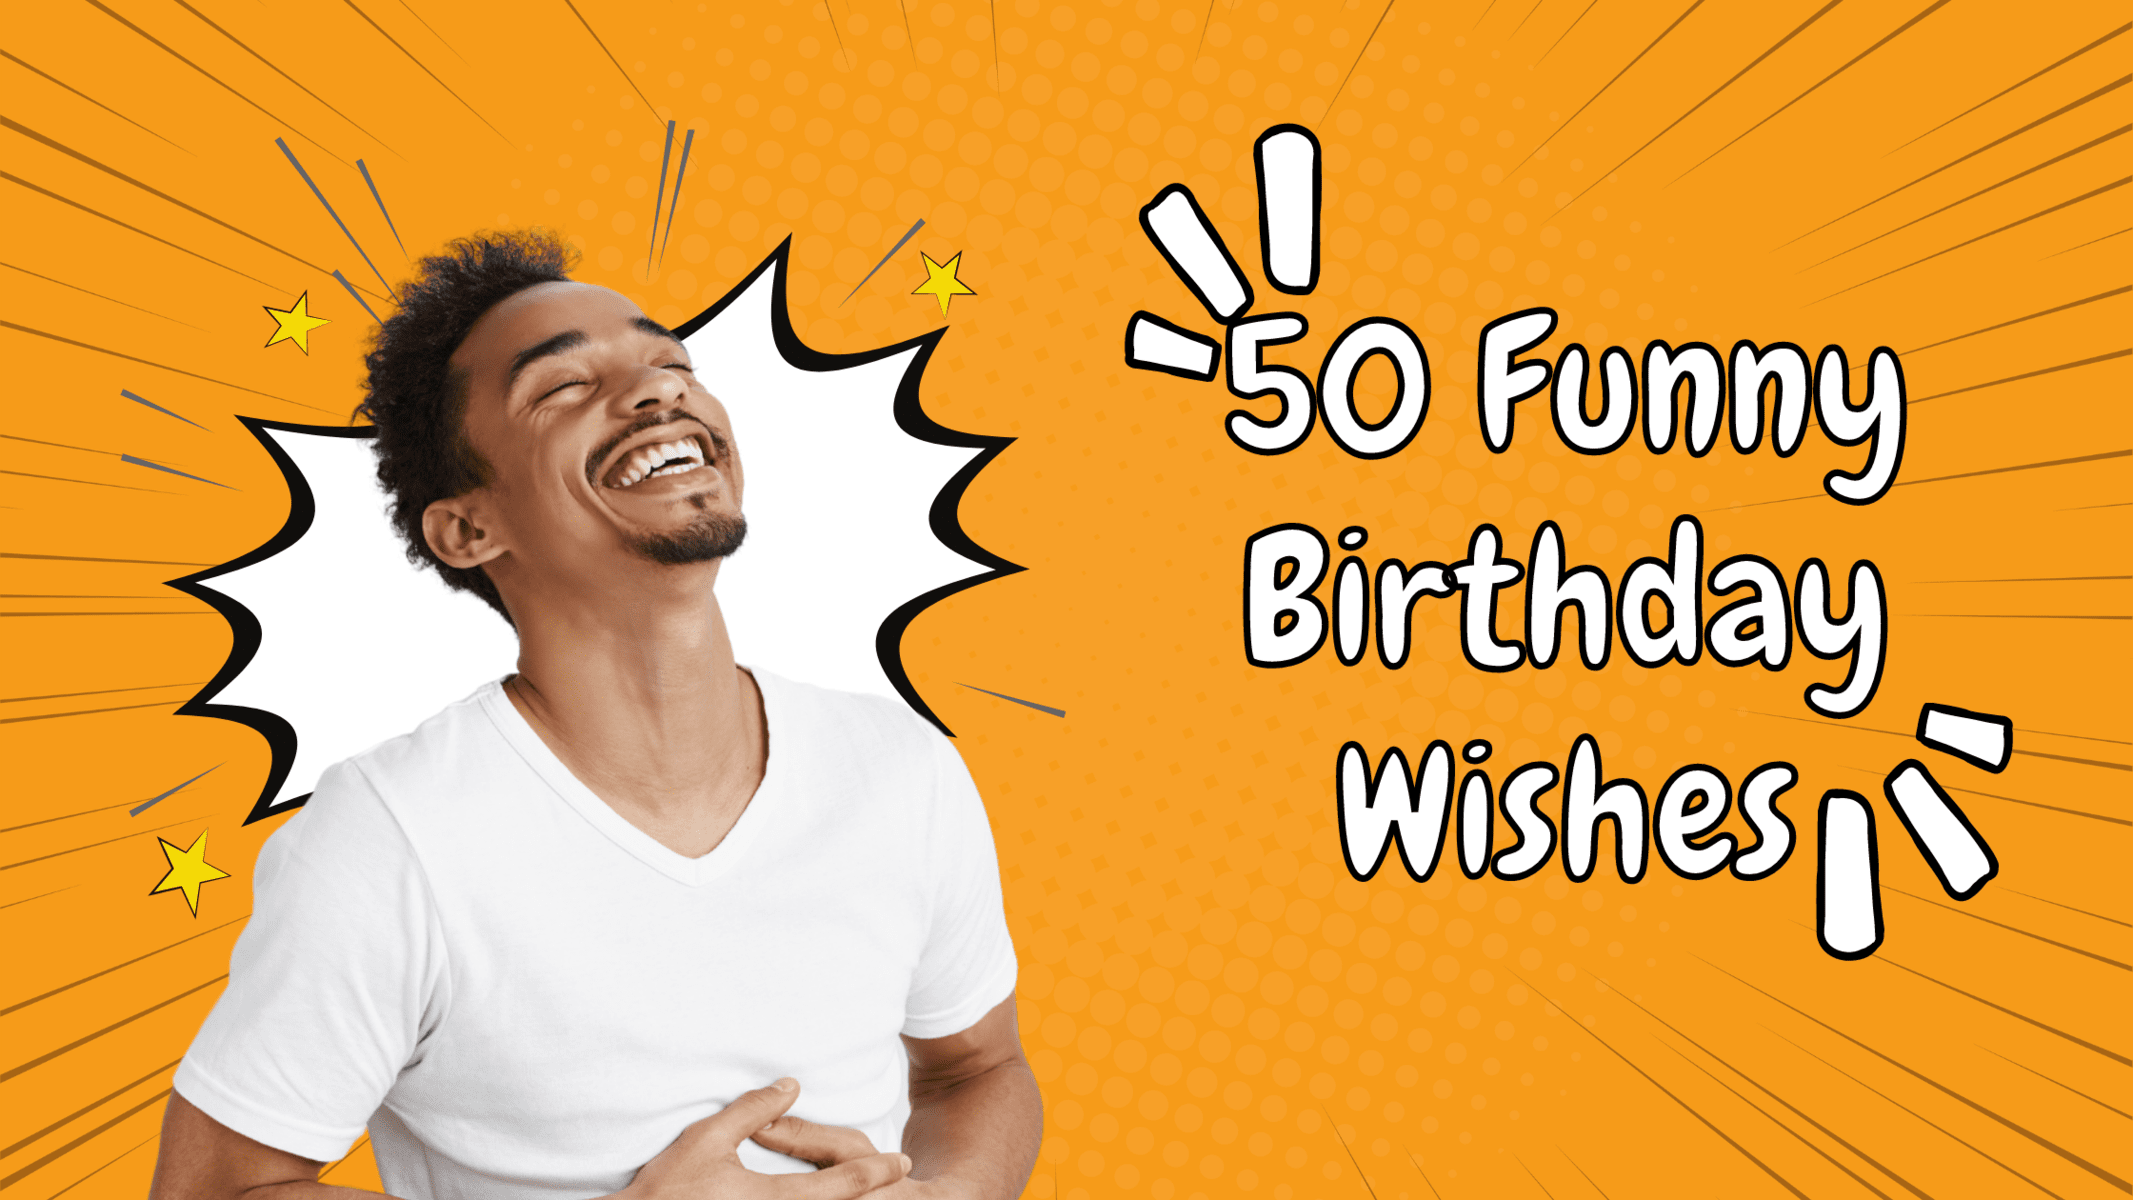 50 Funny Quotes to Wish Birthday in a Hilarious Way